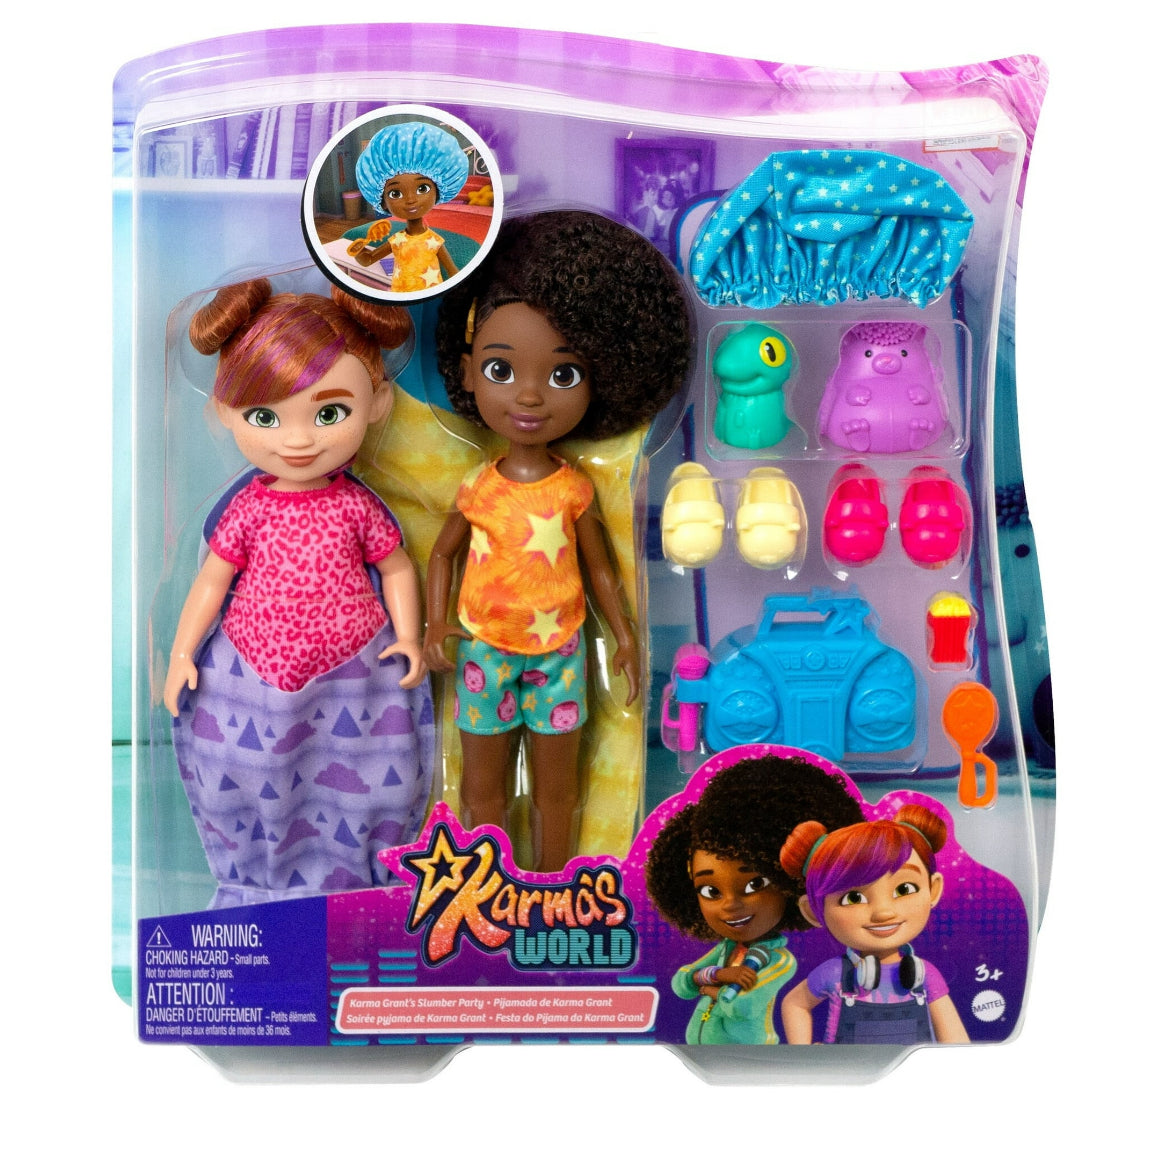 Karma’s World Slumber Party Toy Playset with 2 Dolls & Accessories, 15-Pieces 06429